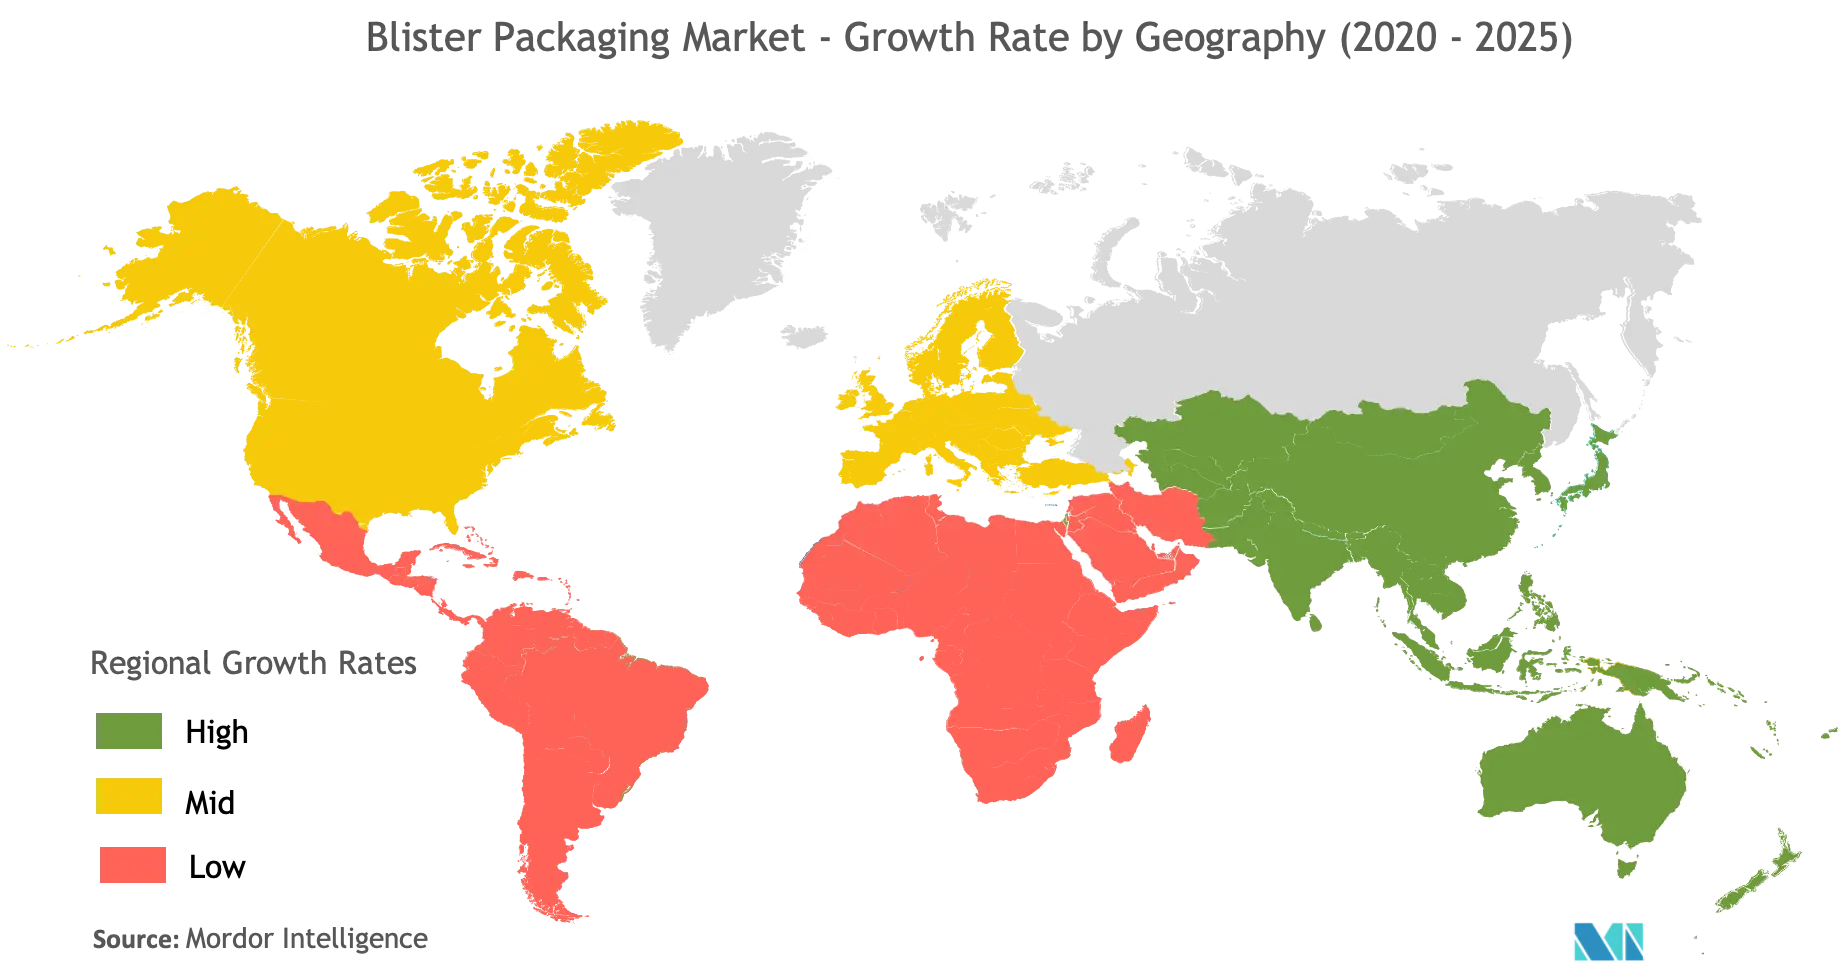 Blister Packaging Market - Growth Rate by Geography (2020-2025)